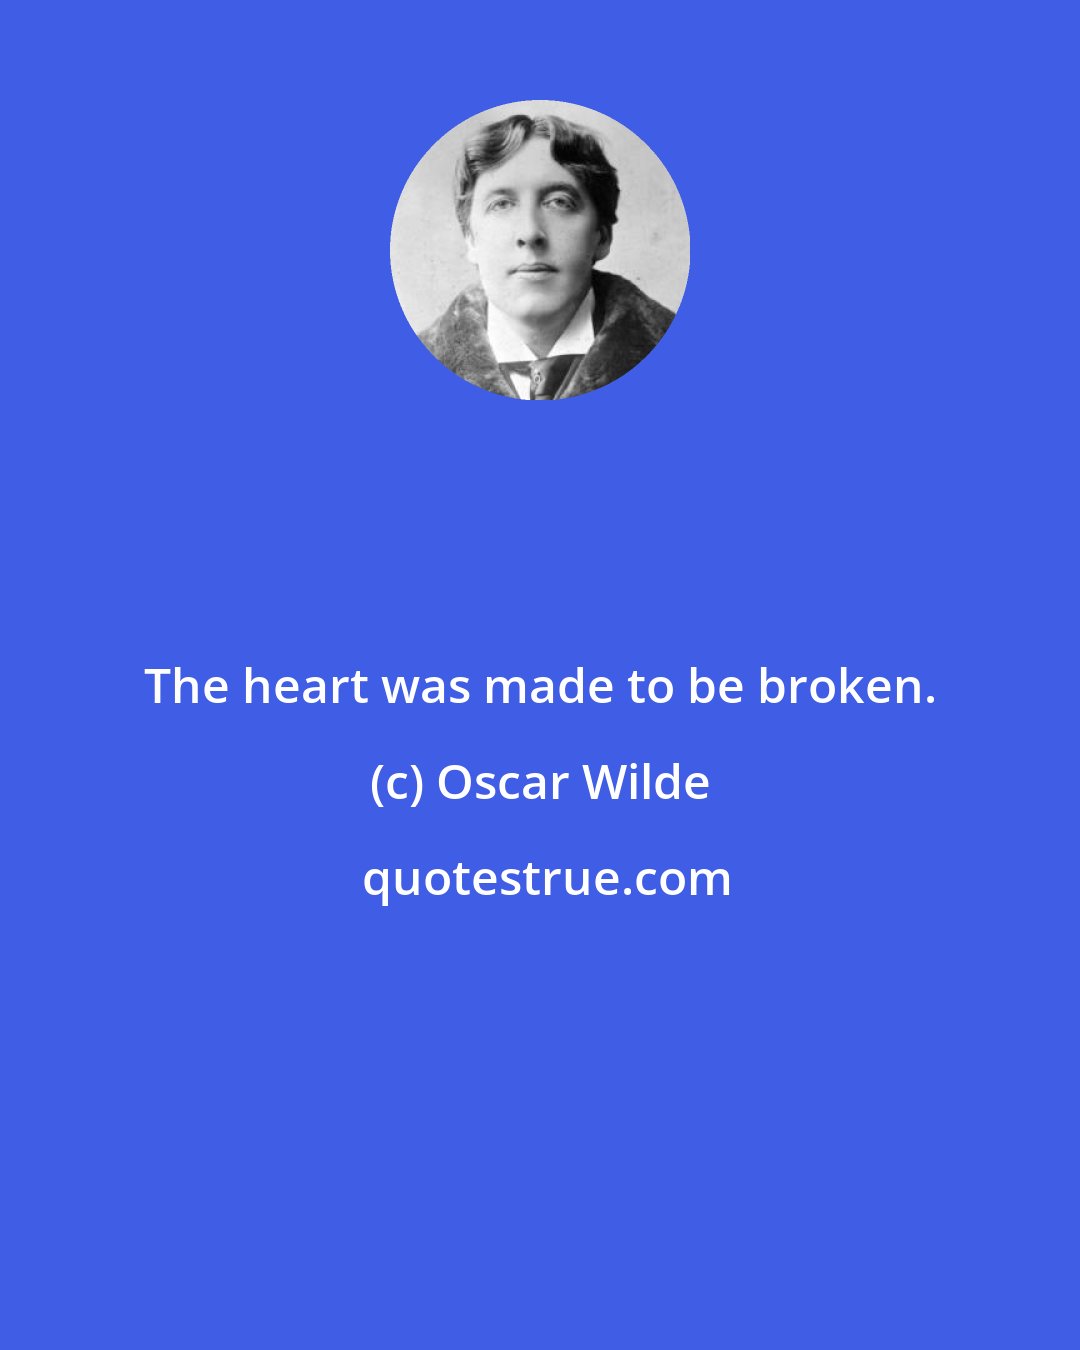 Oscar Wilde: The heart was made to be broken.